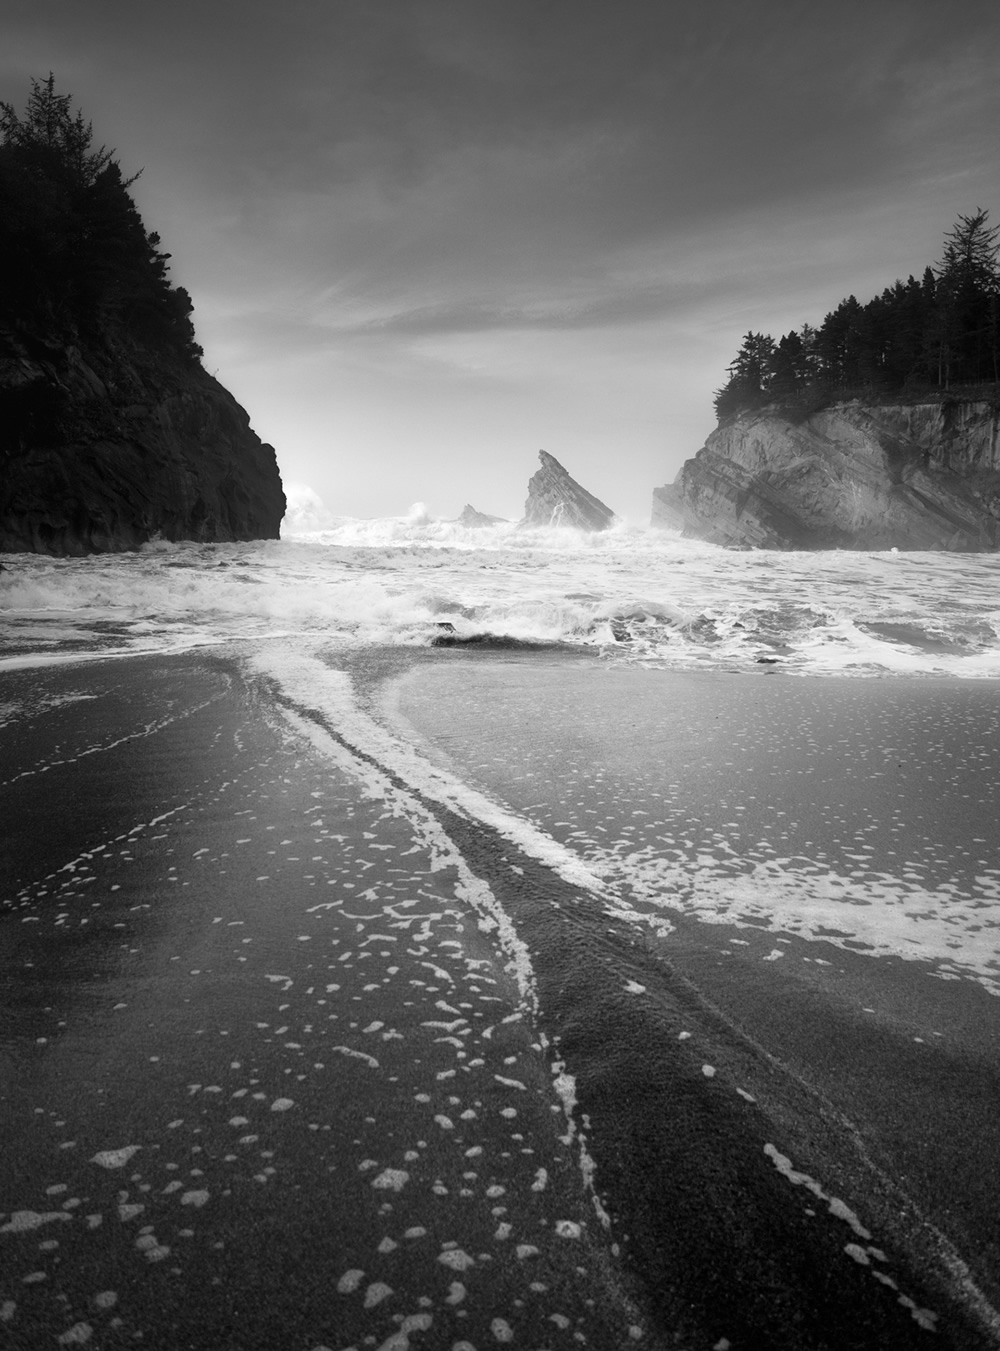 After Earth: Haunting Coastline Landscapes By Rachael Talibart